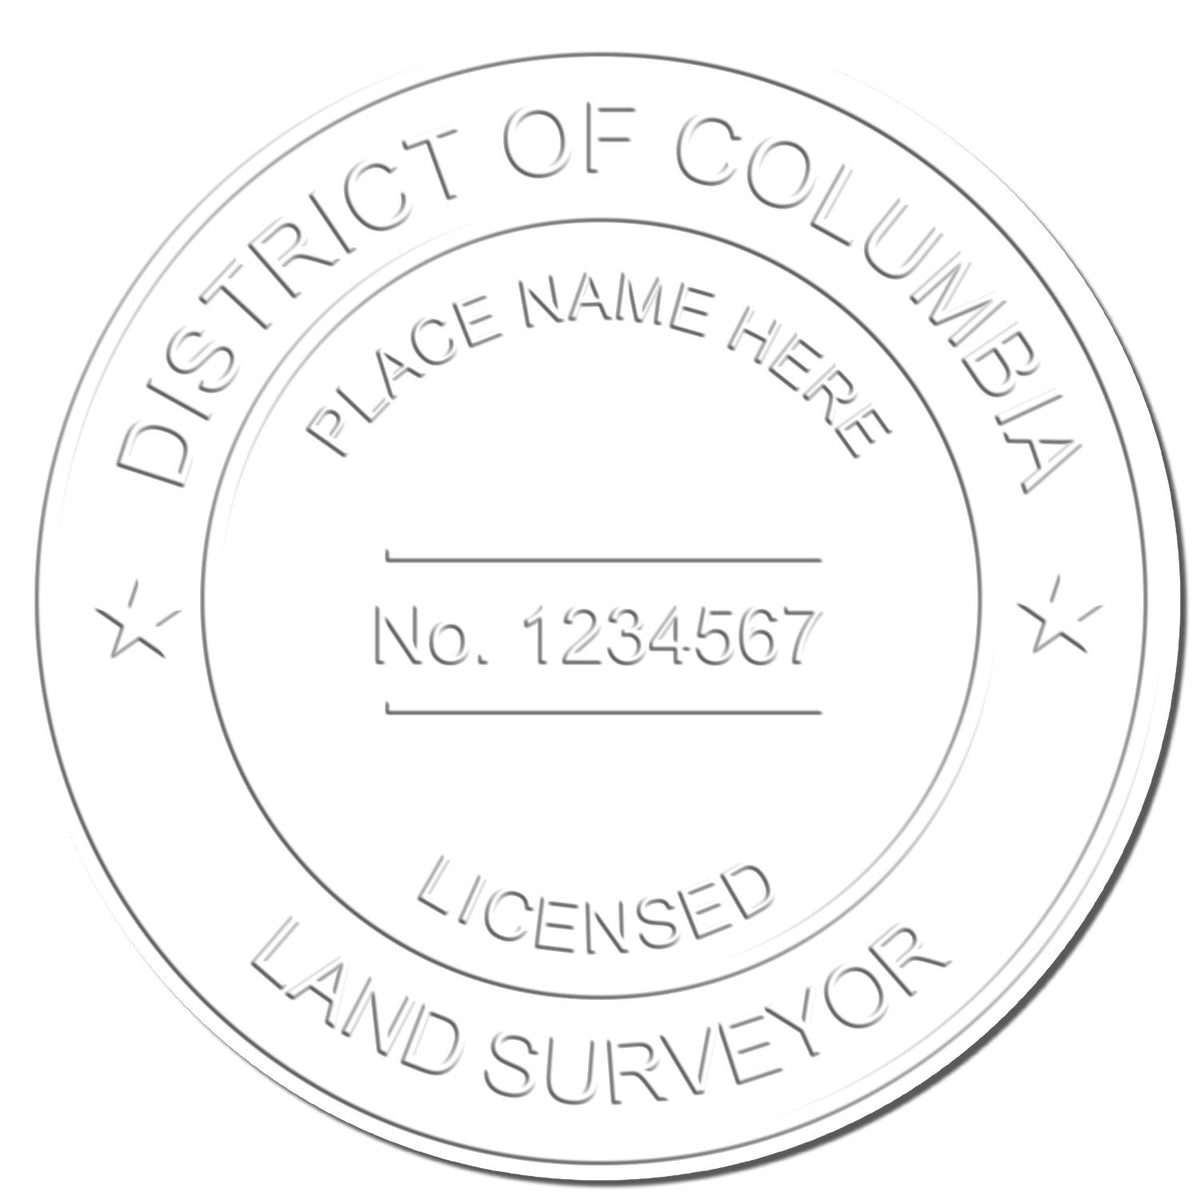 This paper is stamped with a sample imprint of the District of Columbia Desk Surveyor Seal Embosser, signifying its quality and reliability.